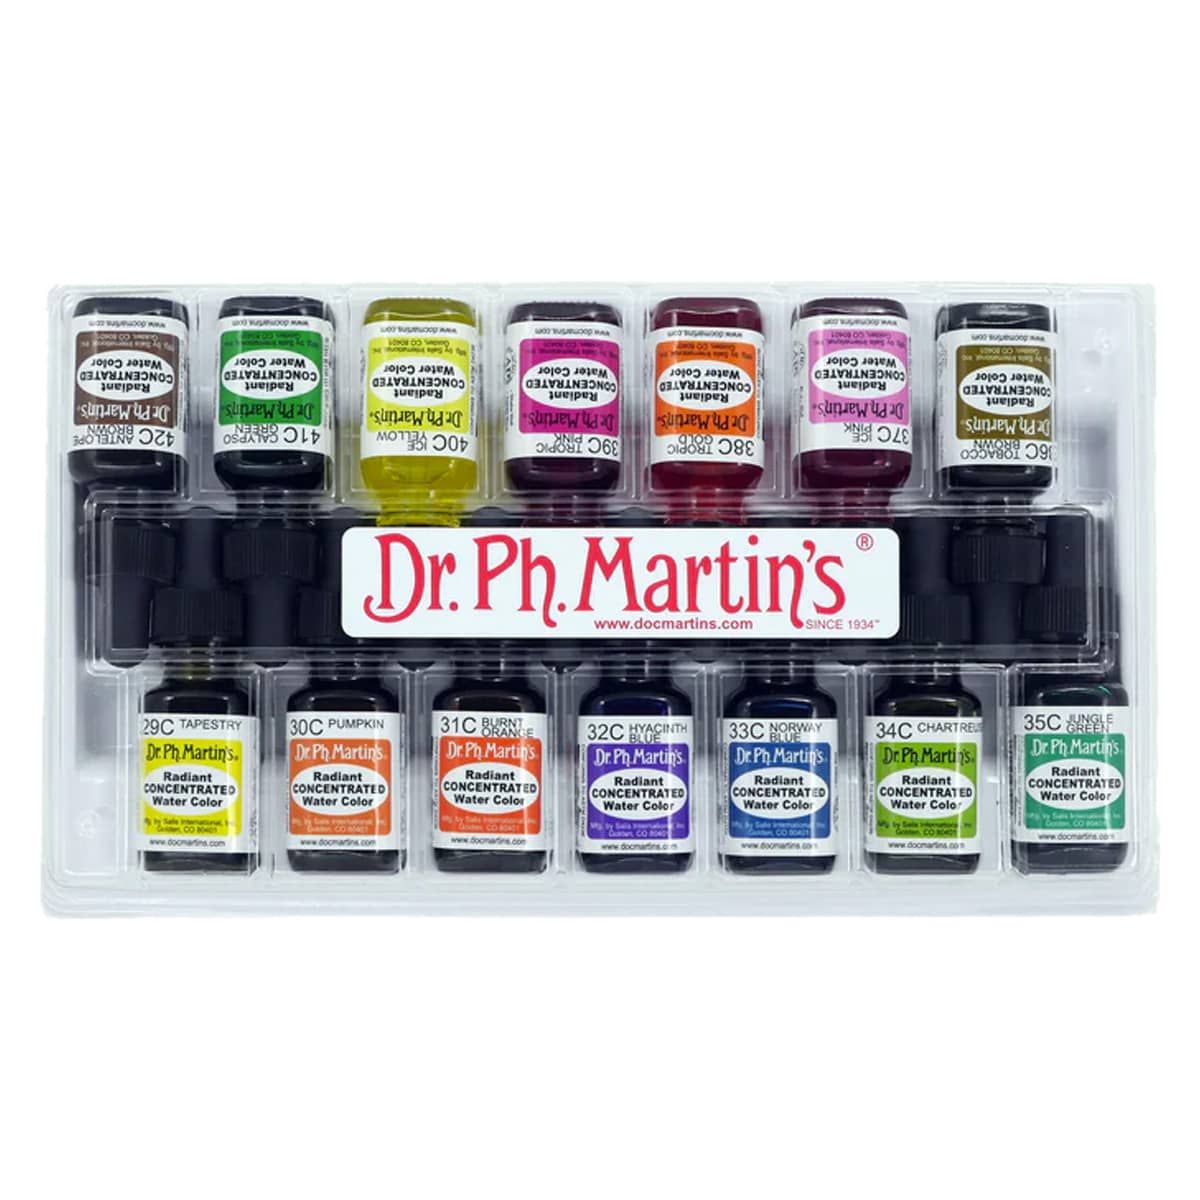 Dr. Ph. Martin's Radiant Concentrated Watercolor, Set C (Colors 29-42)